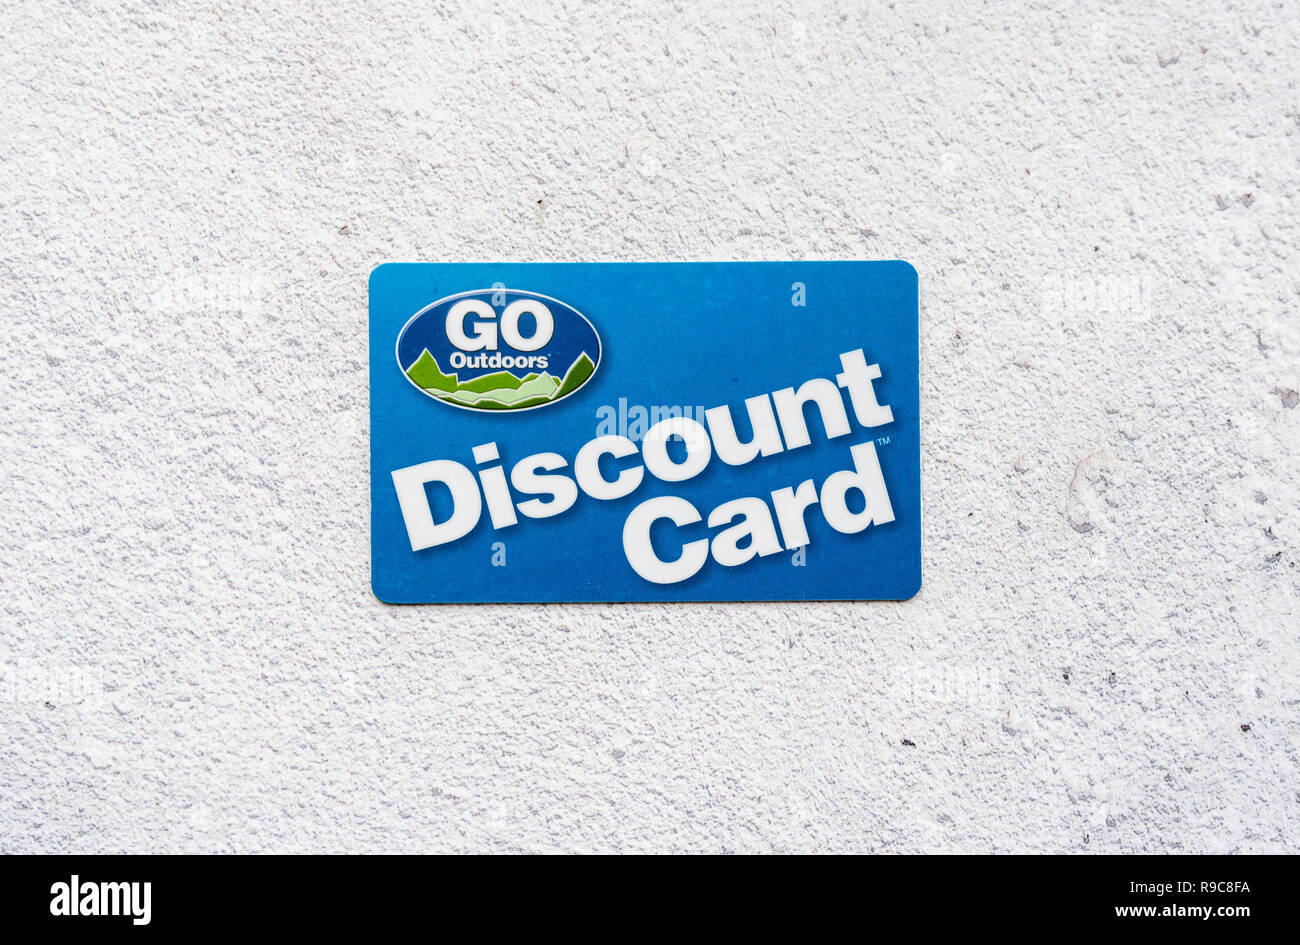 Discount card for Go Outdoors retail store Stock Photo